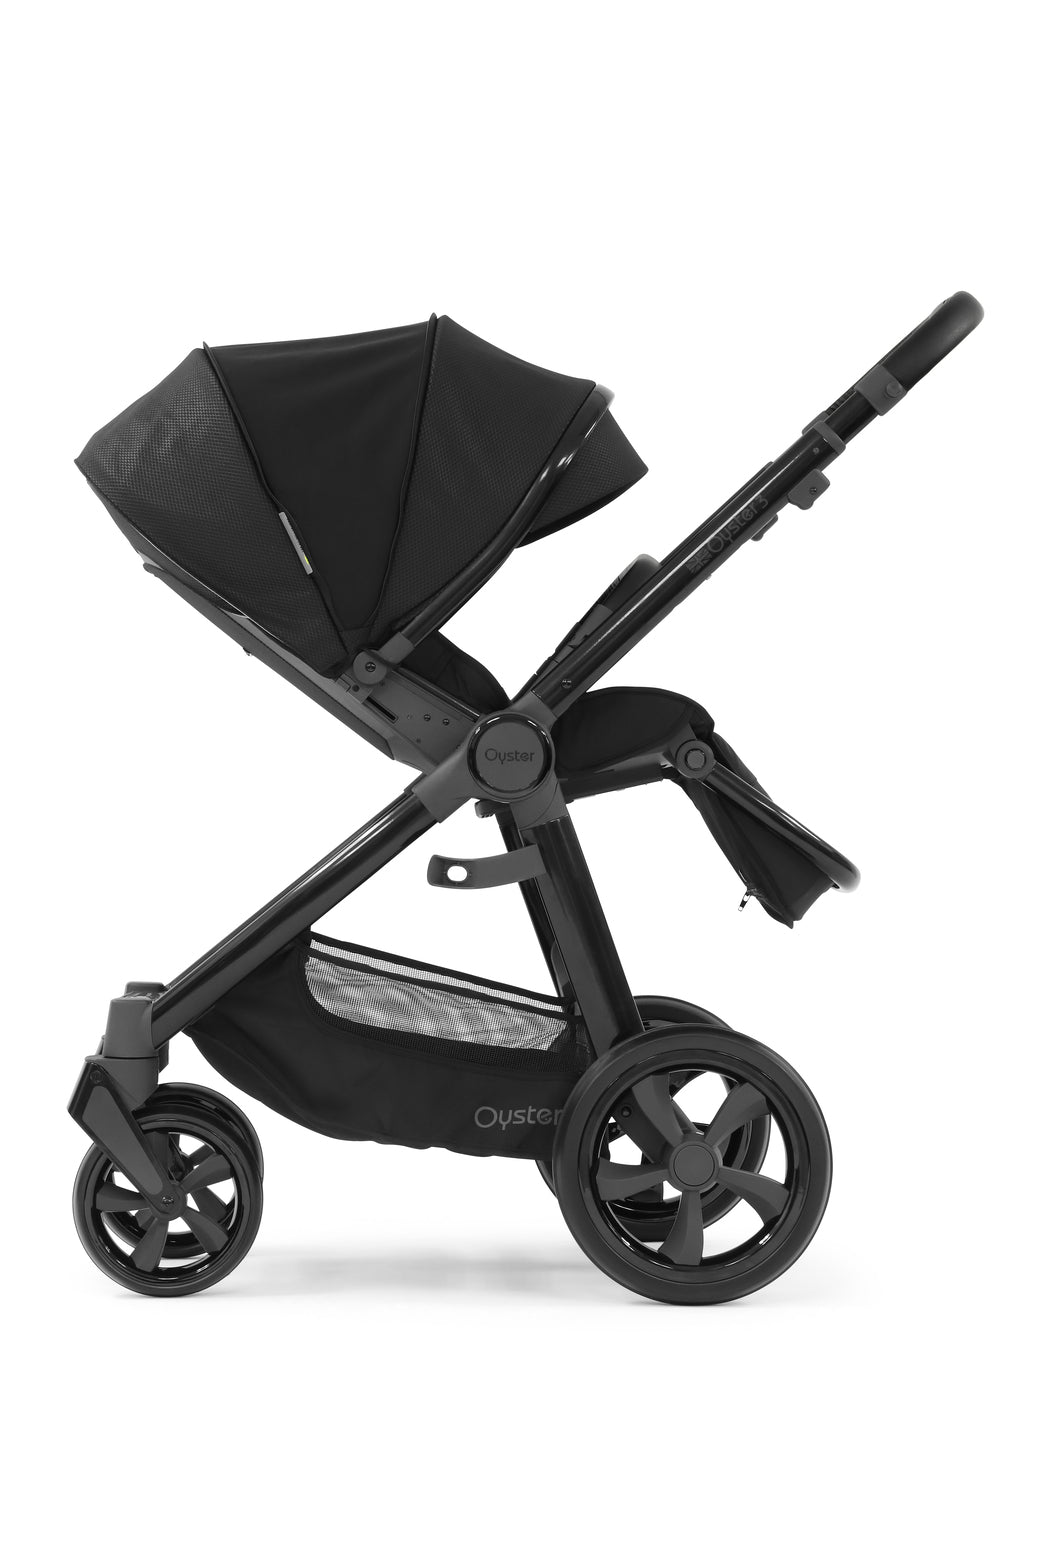 Babystyle Oyster 3 Essential 5 Piece Travel System Bundle With Carbriofix - Pixel - For Your Little One